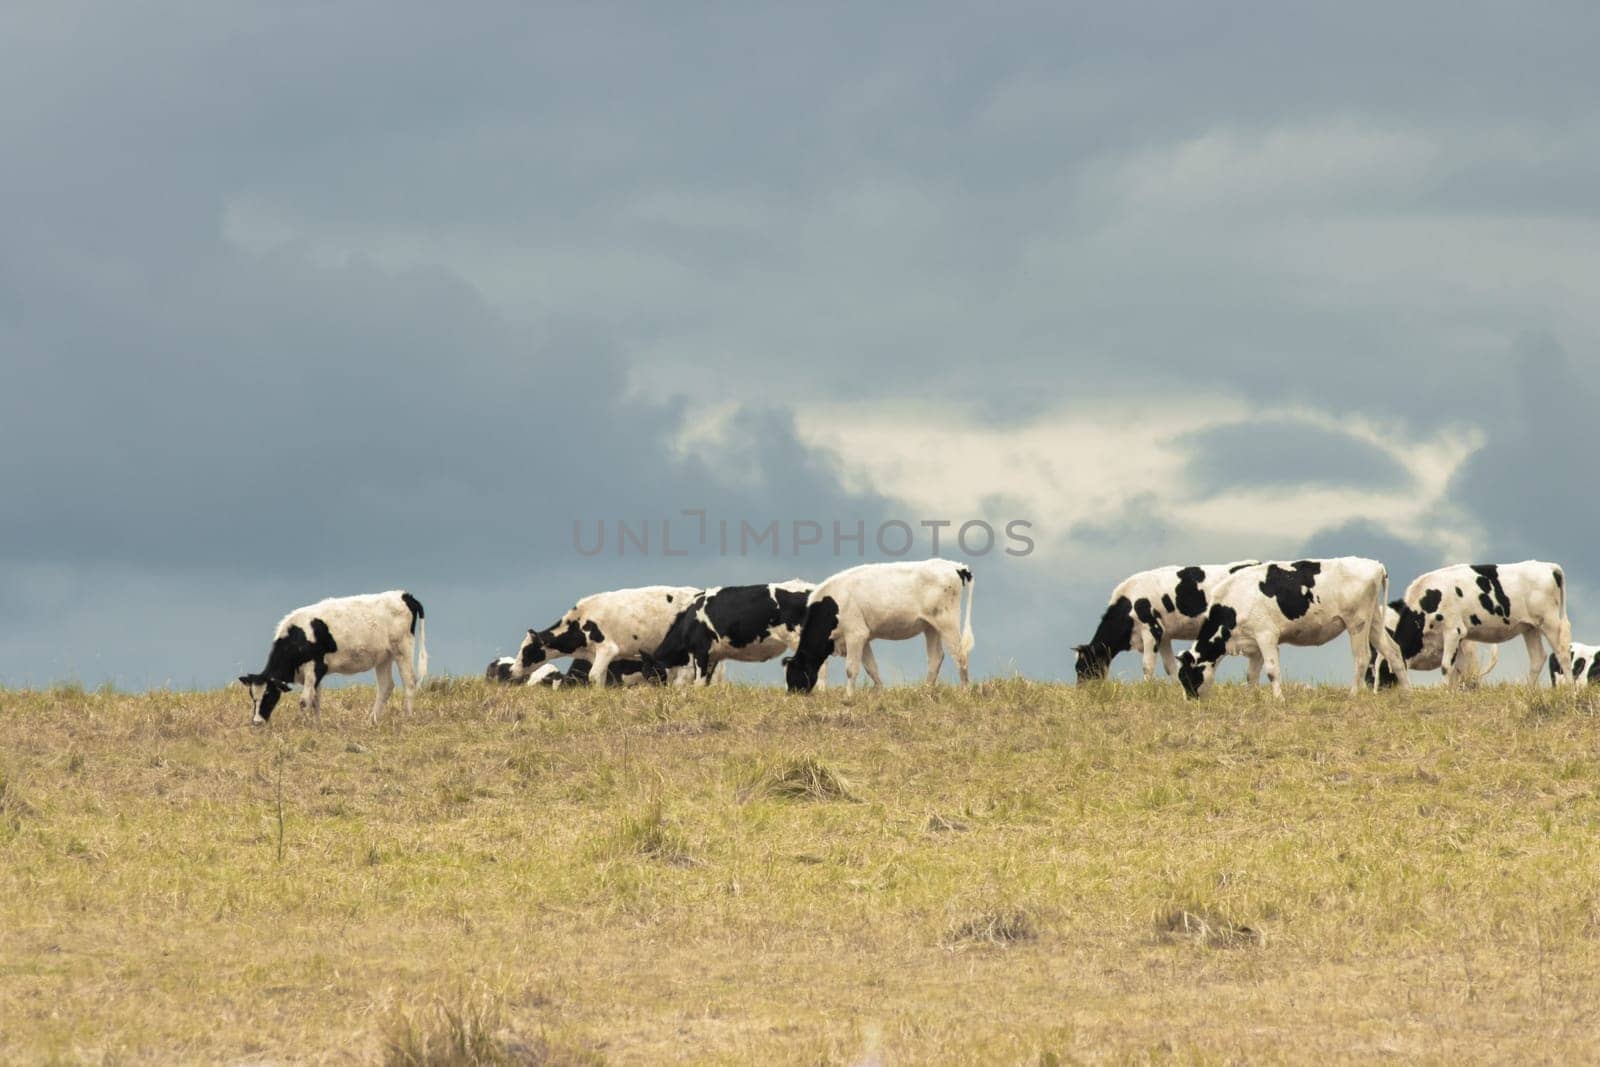 A herd of cattle grazing on a dry grass field